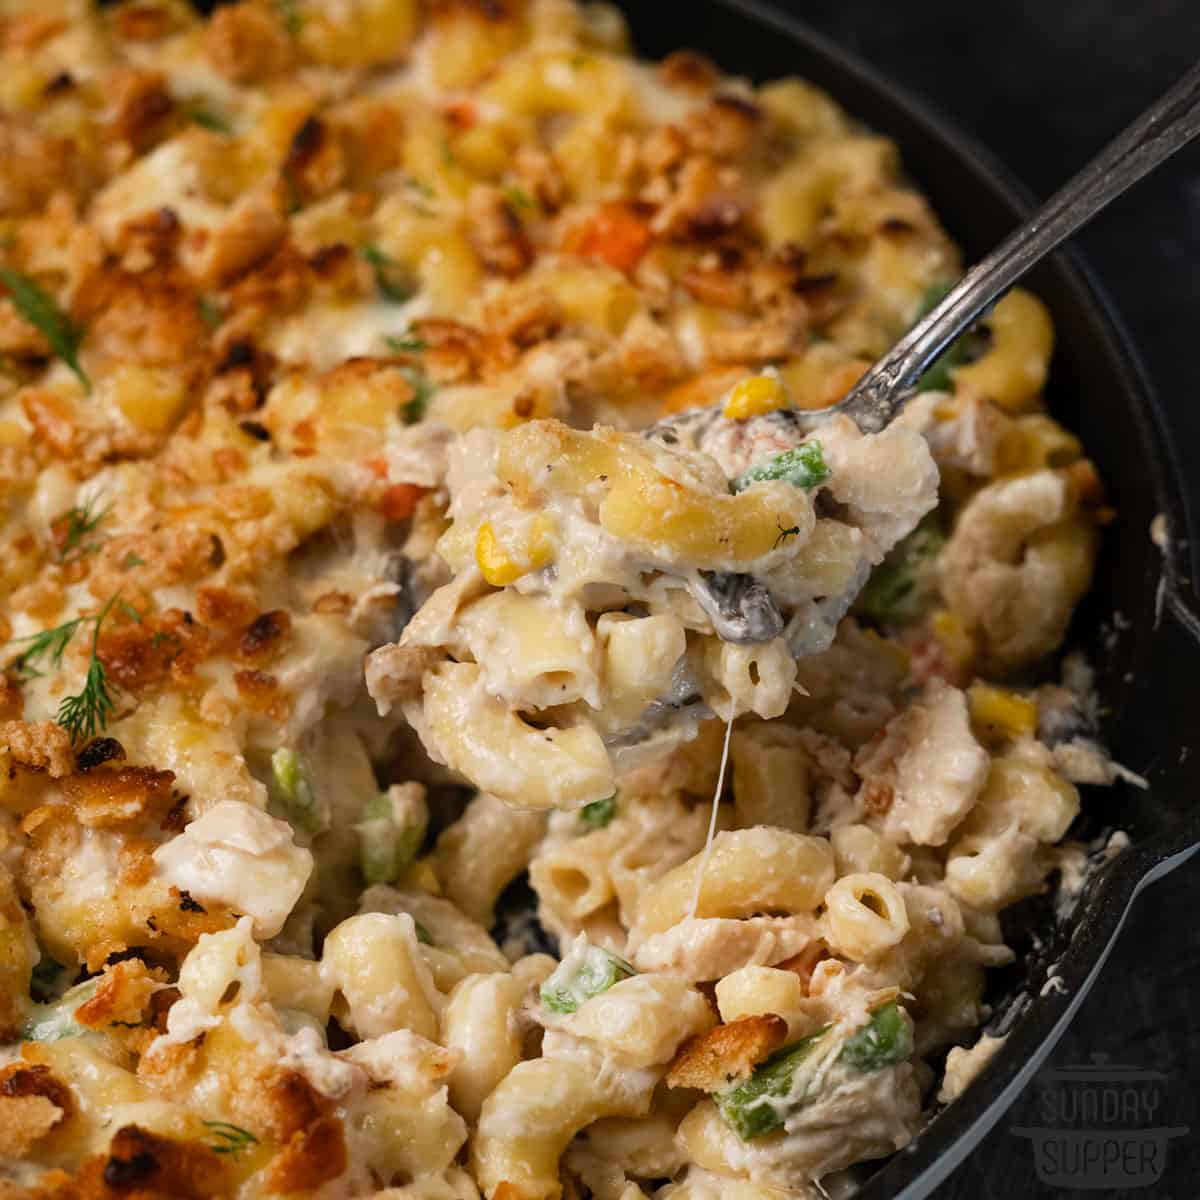 a spoon scooping tuna noodle casserole out of a pan